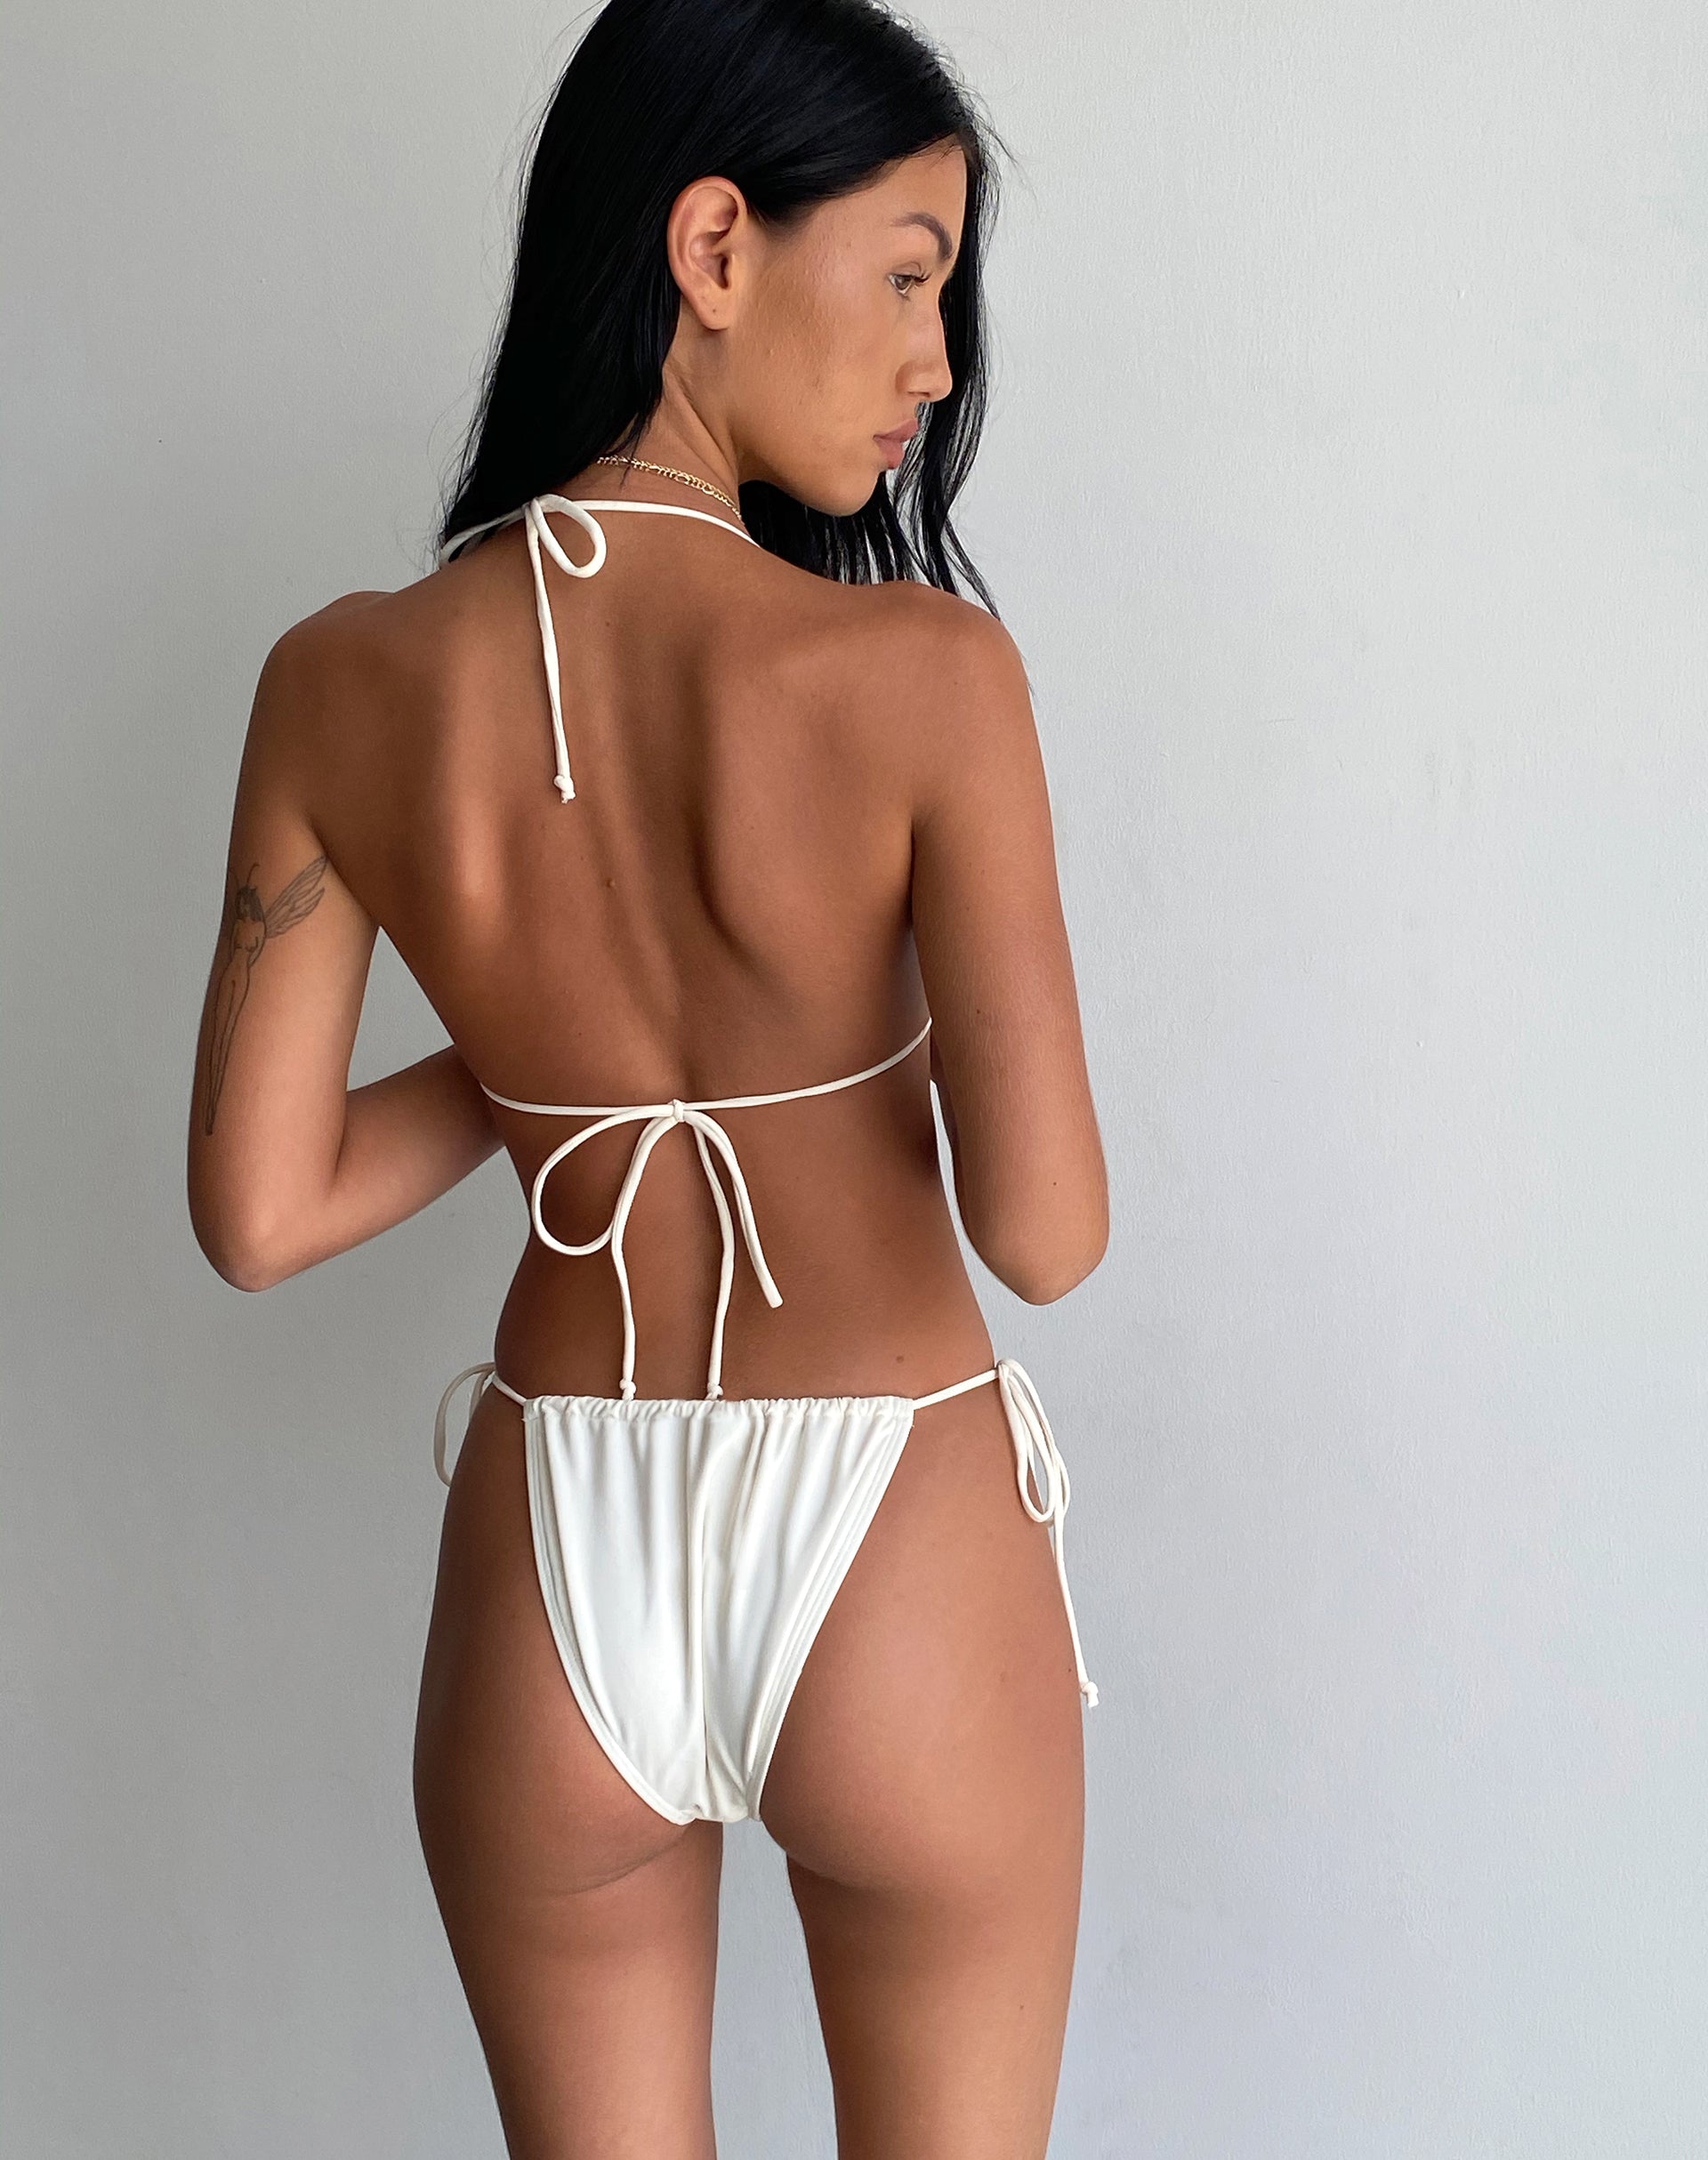 Image of Pami Bikini Top in Ivory with Black Bow